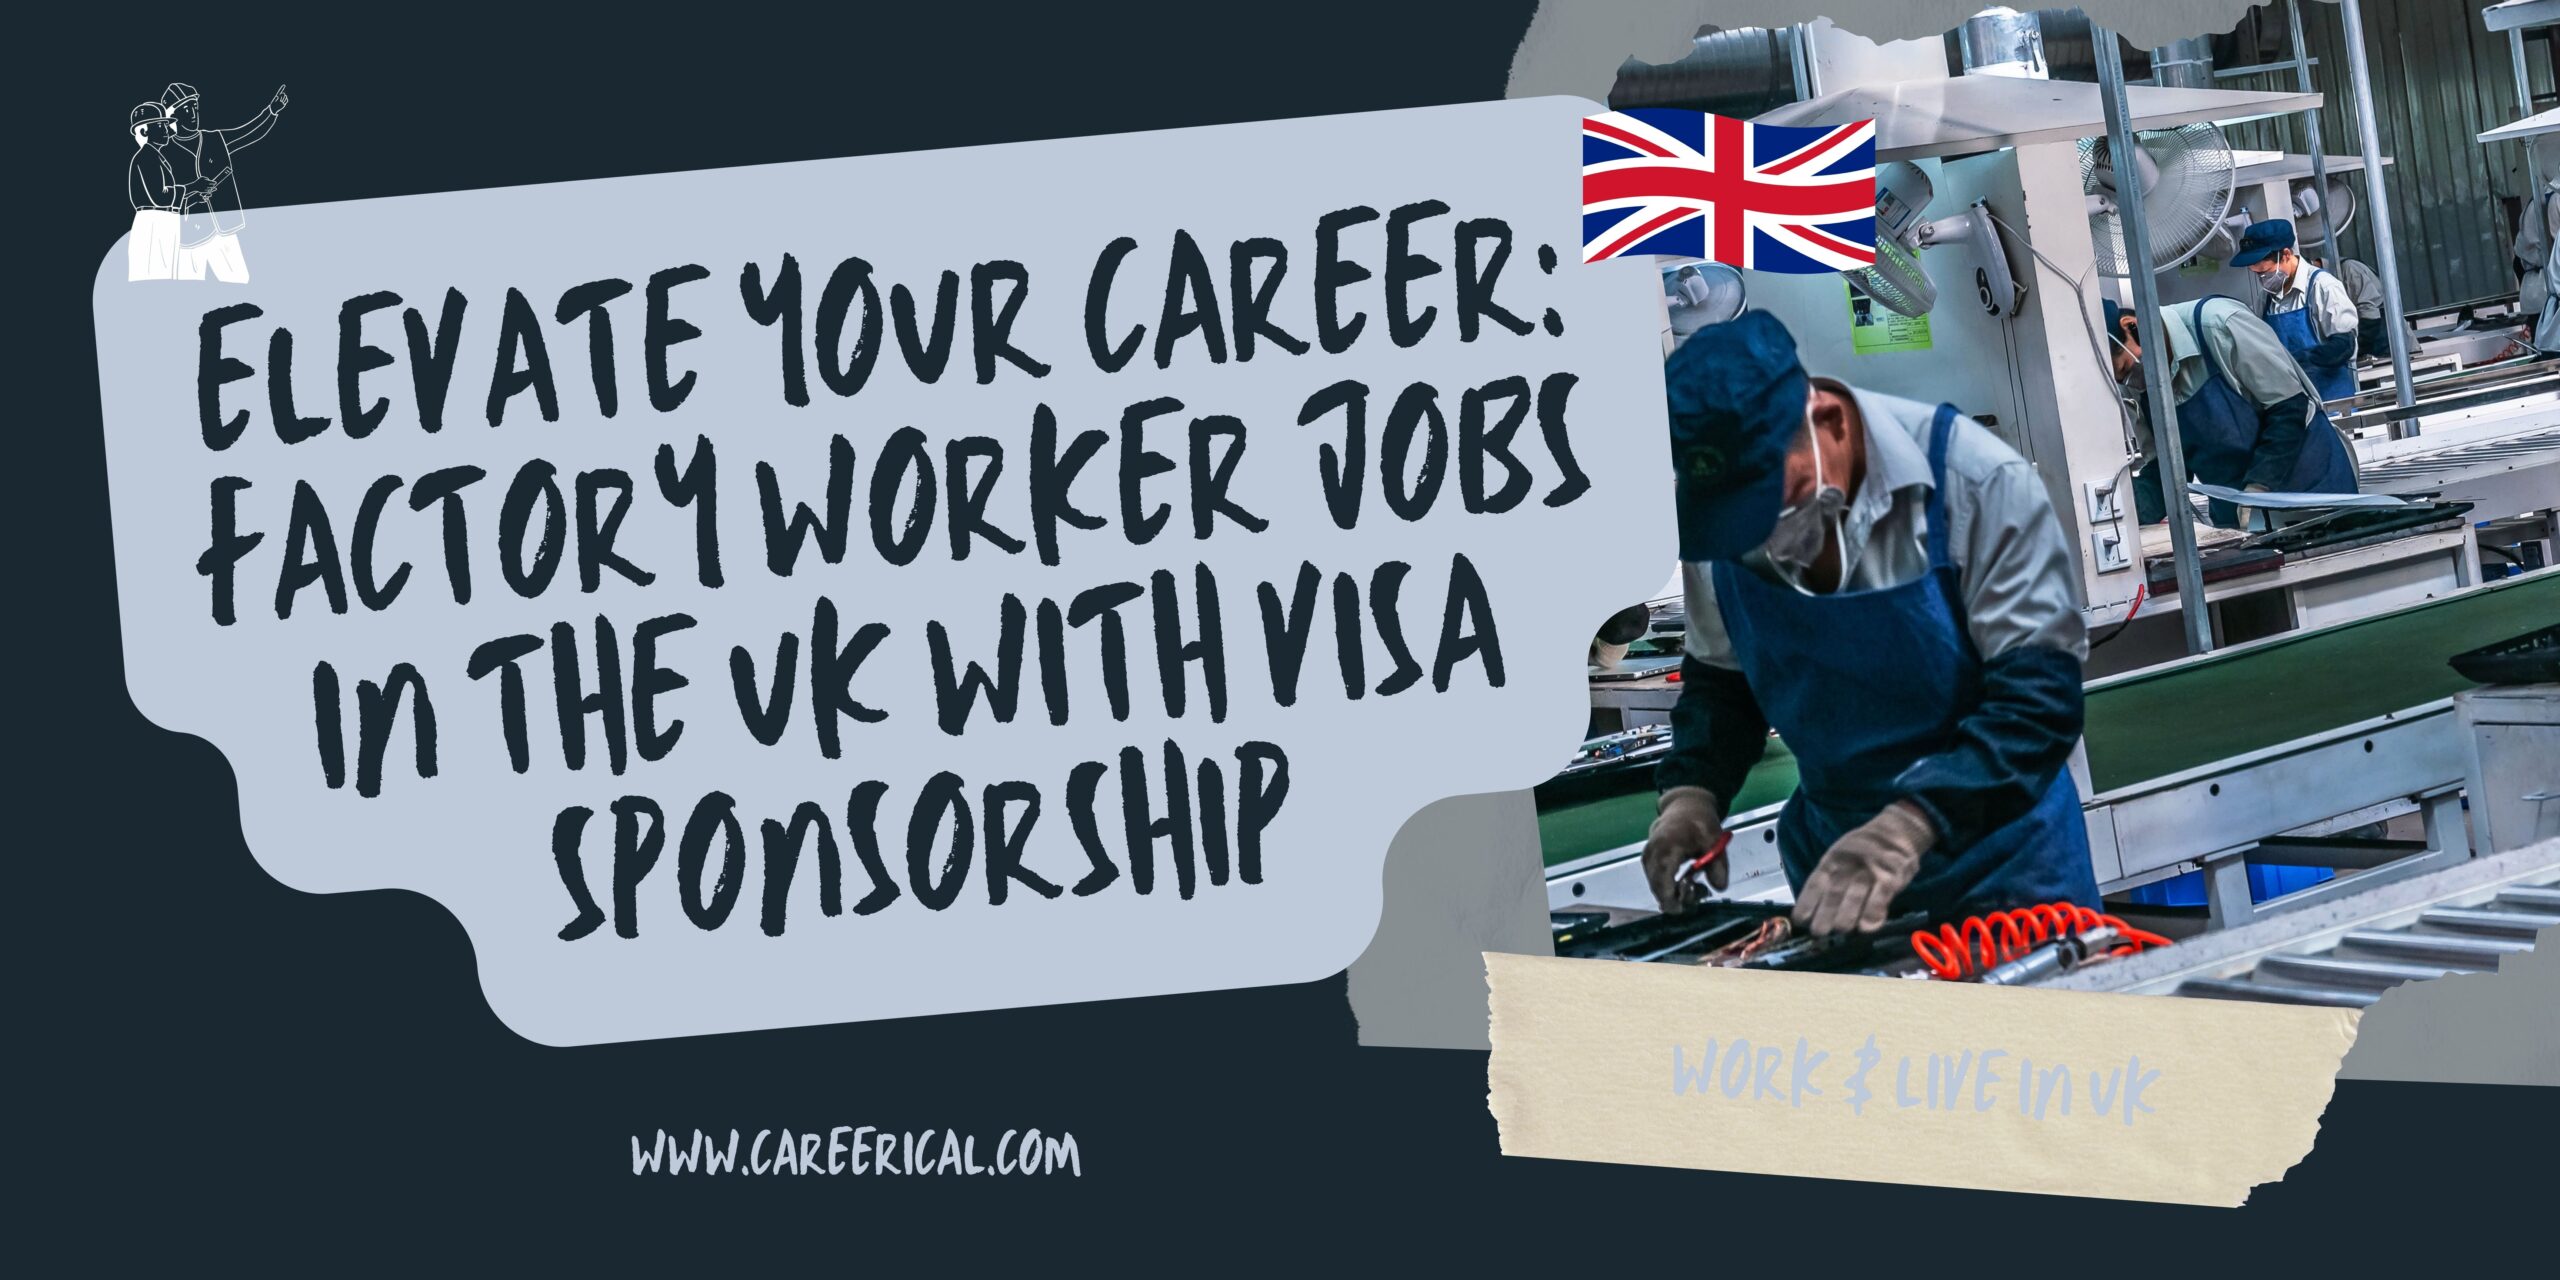 Elevate Your Career Factory Worker Jobs in the UK with Visa Sponsorship